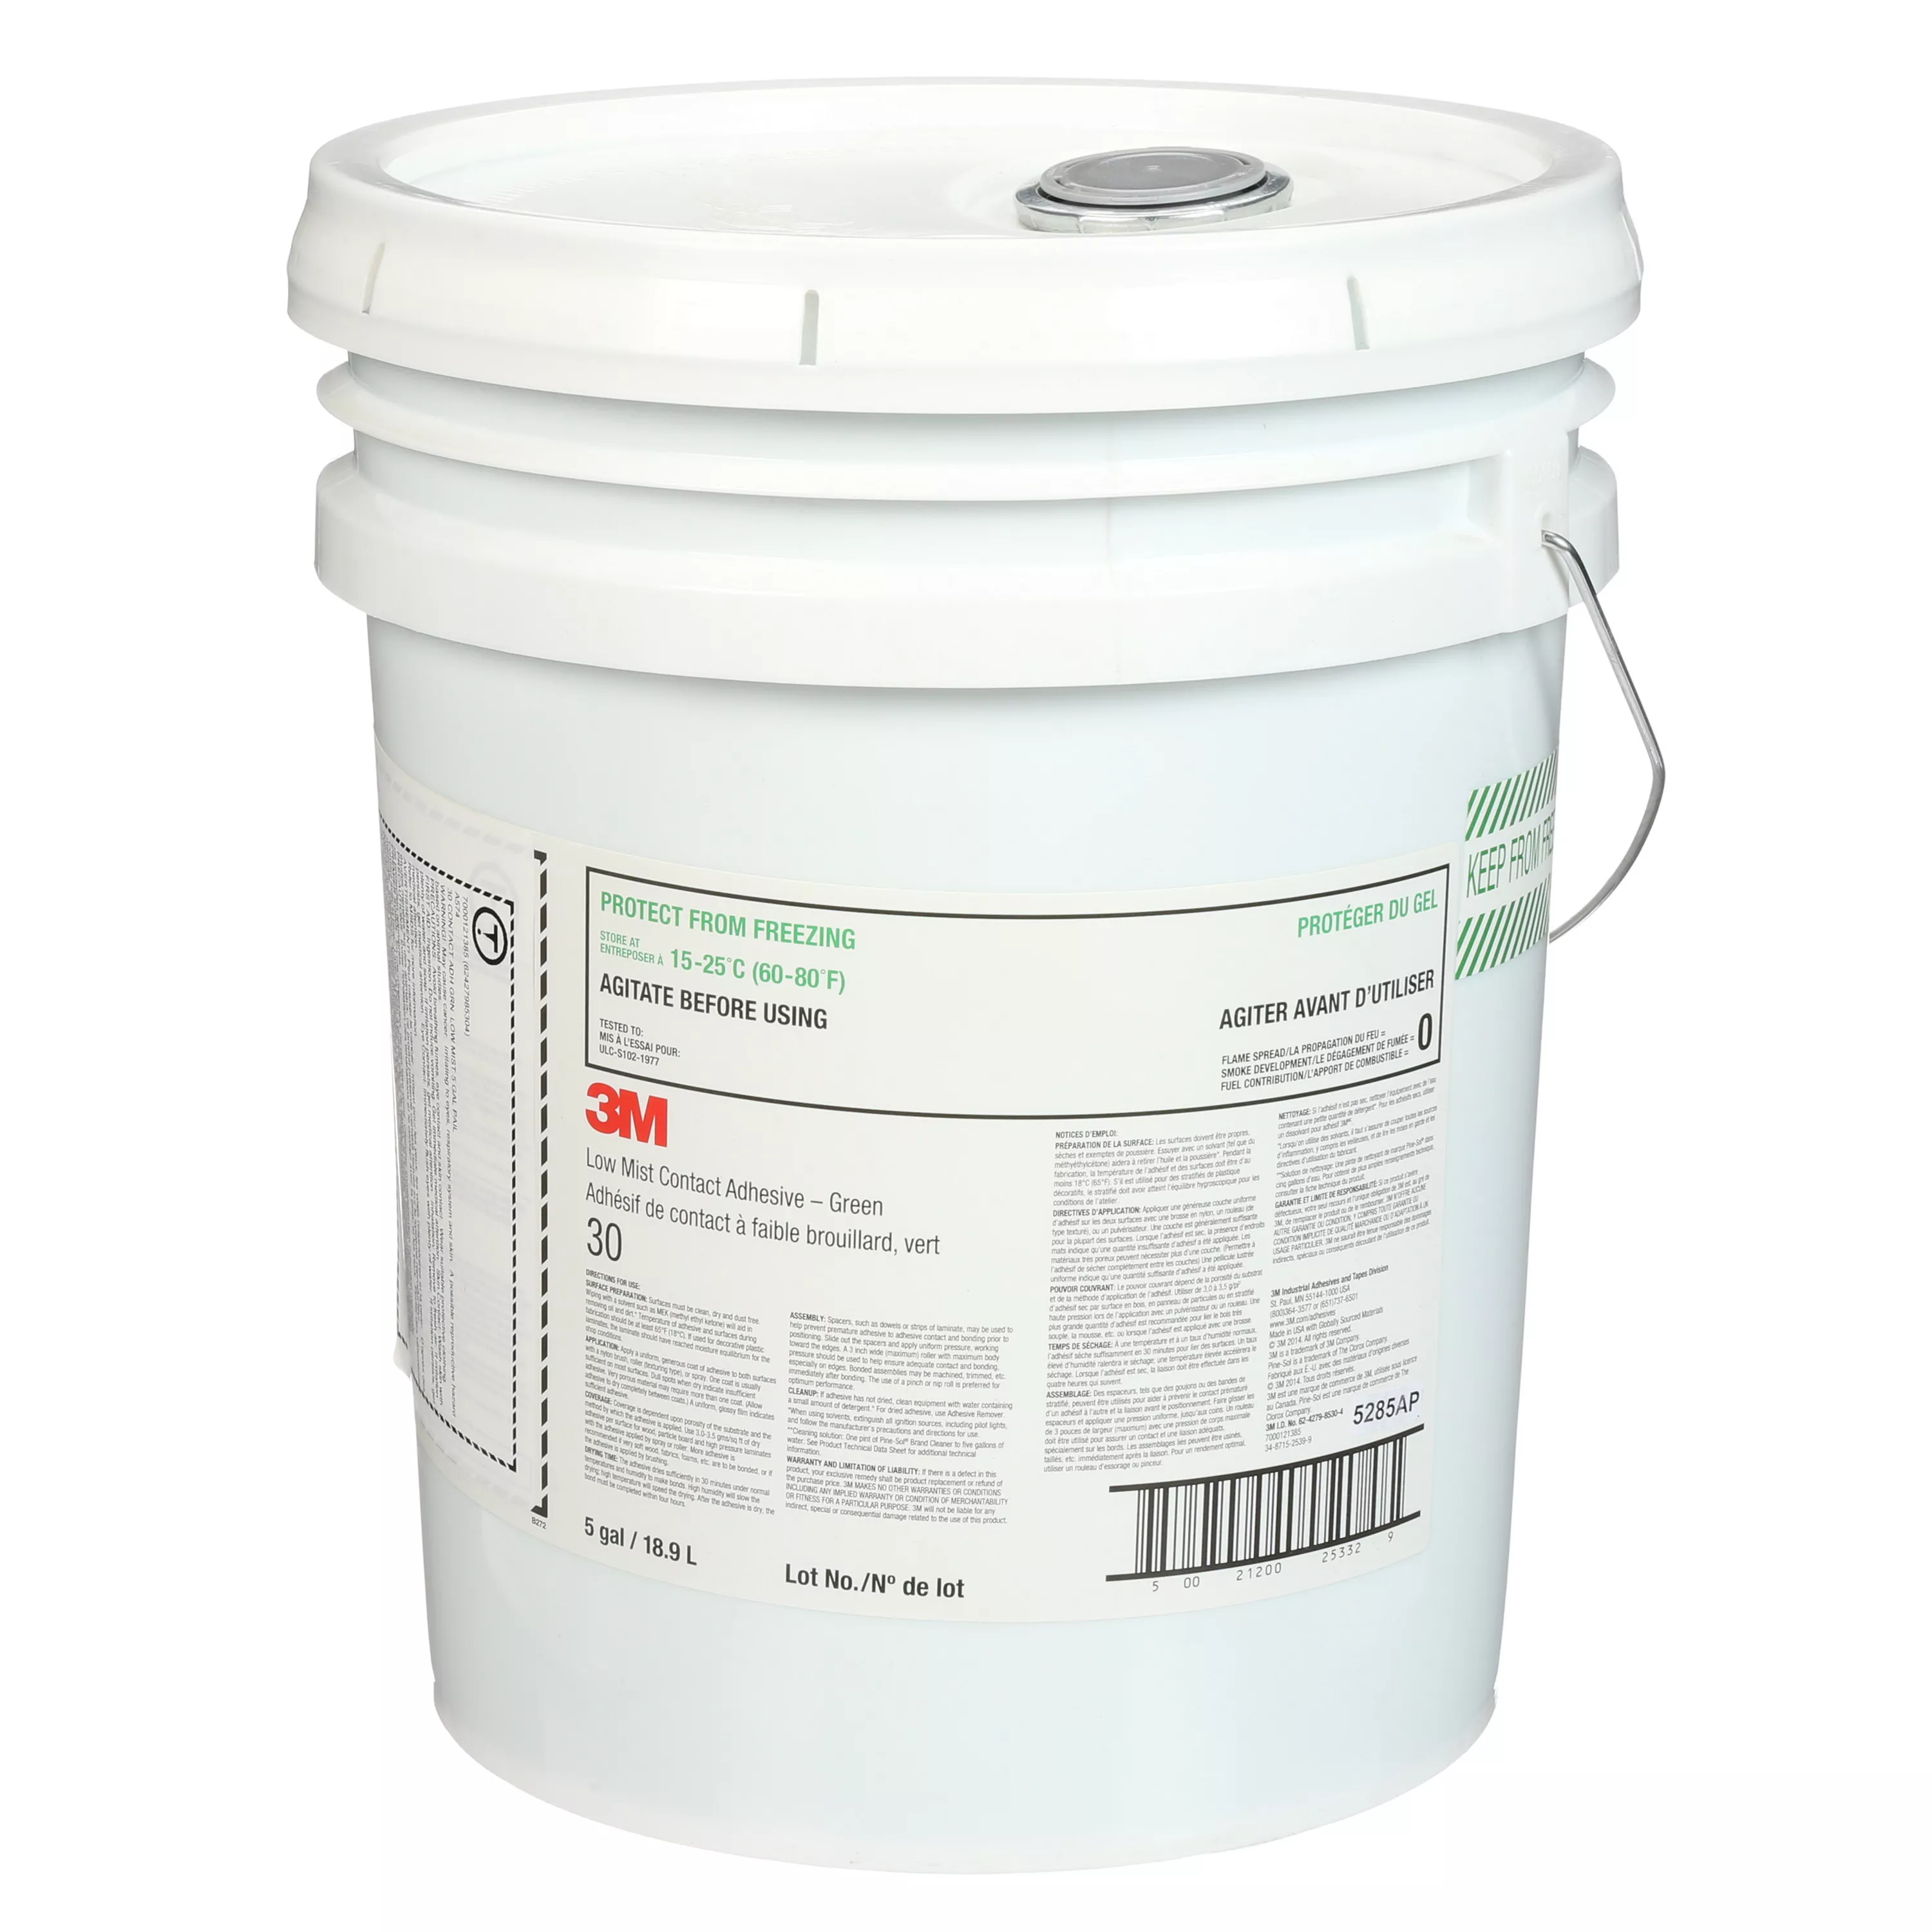 3M™ Low Mist Contact Adhesive, Green, 5 Gallon (Pail), 1 Can/Drum